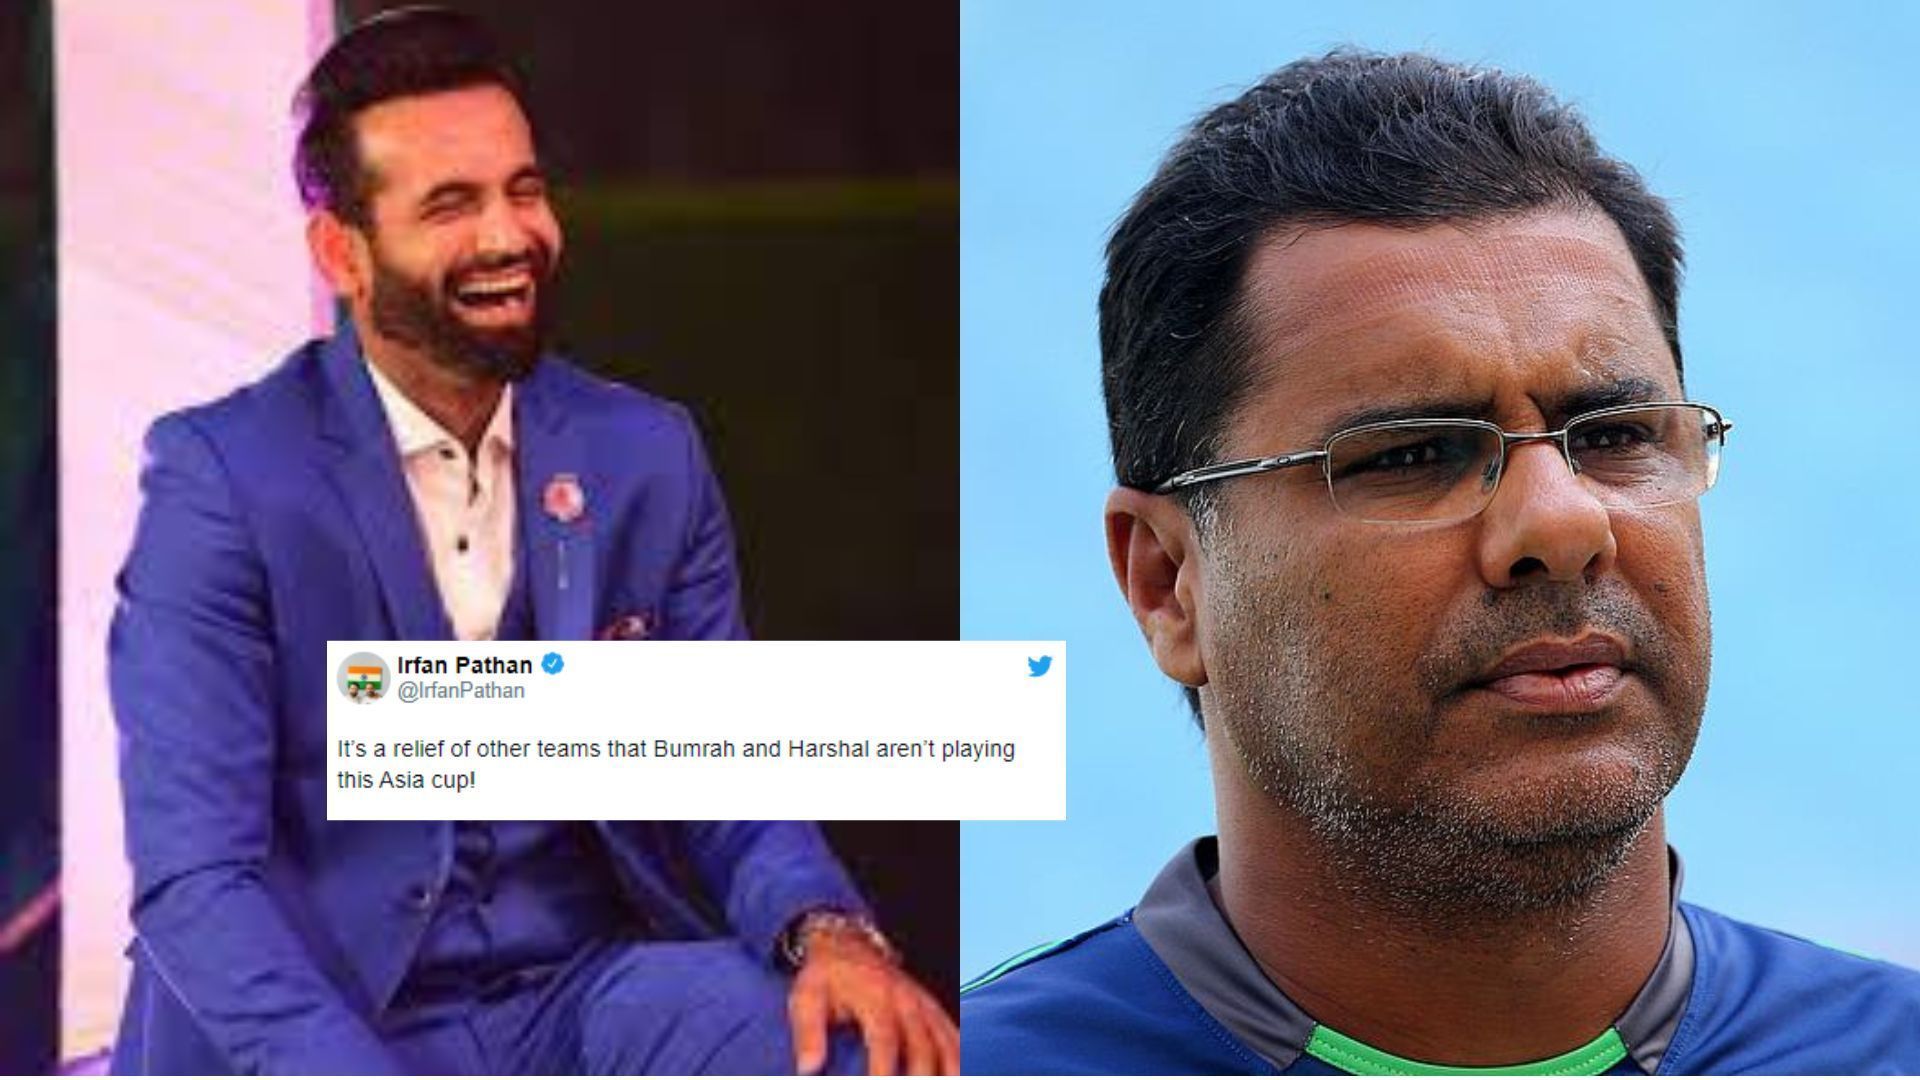 Irfan Pathan (L) and Waqar Younis. (P.C.:Twitter)